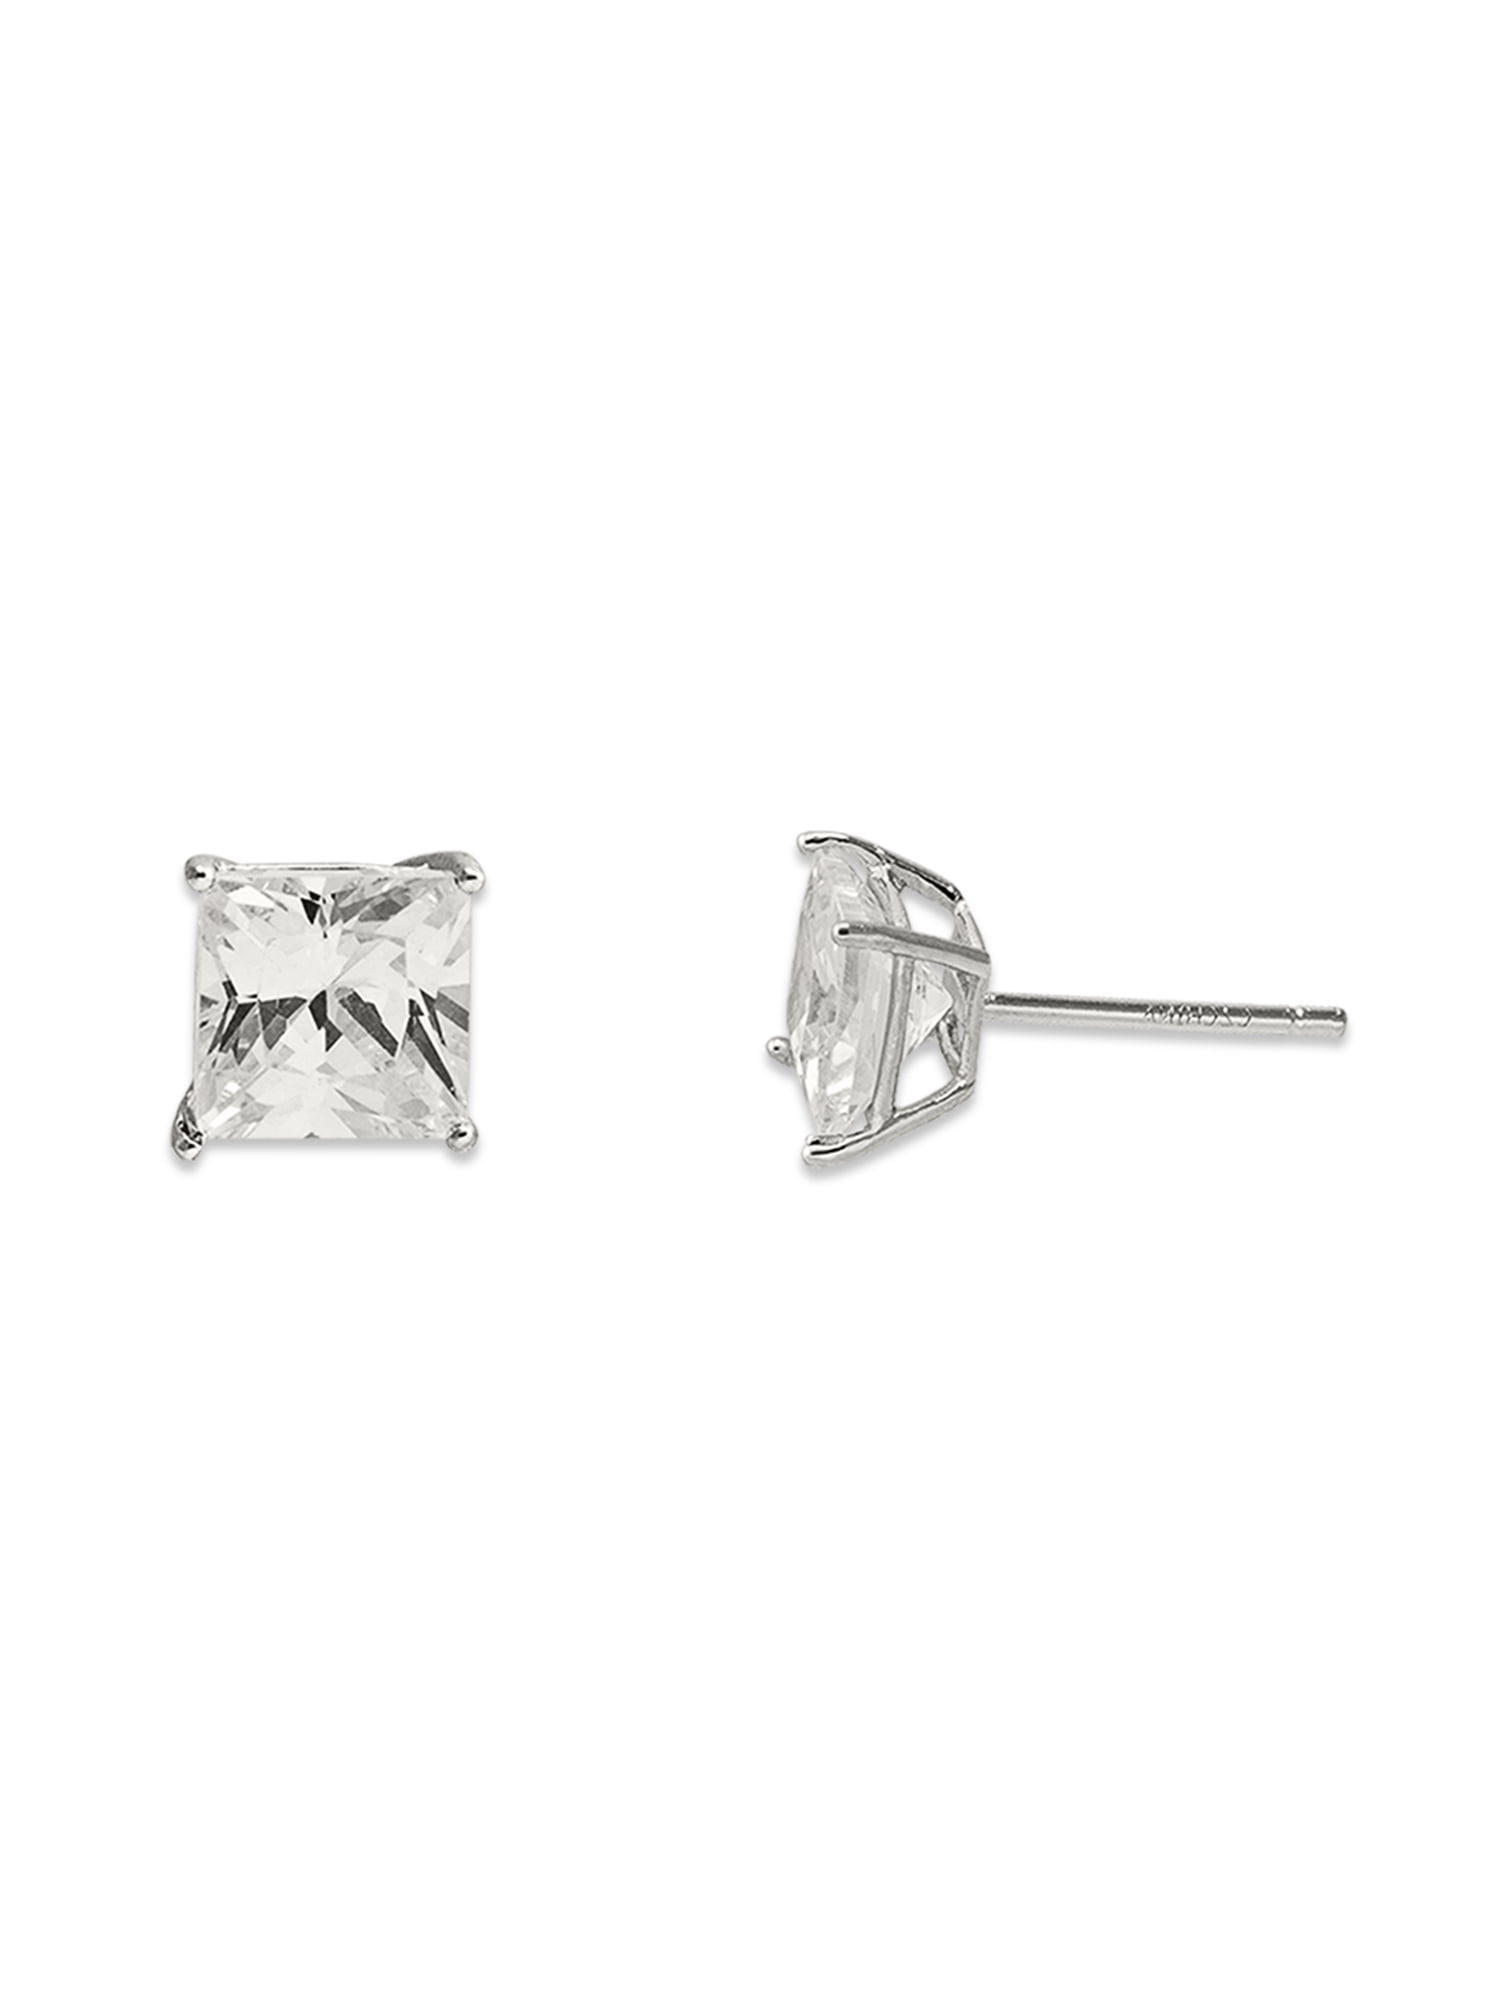 Brilliance Fine Jewelry - 7mm Square CZ 10kt White Gold Stud Earrings